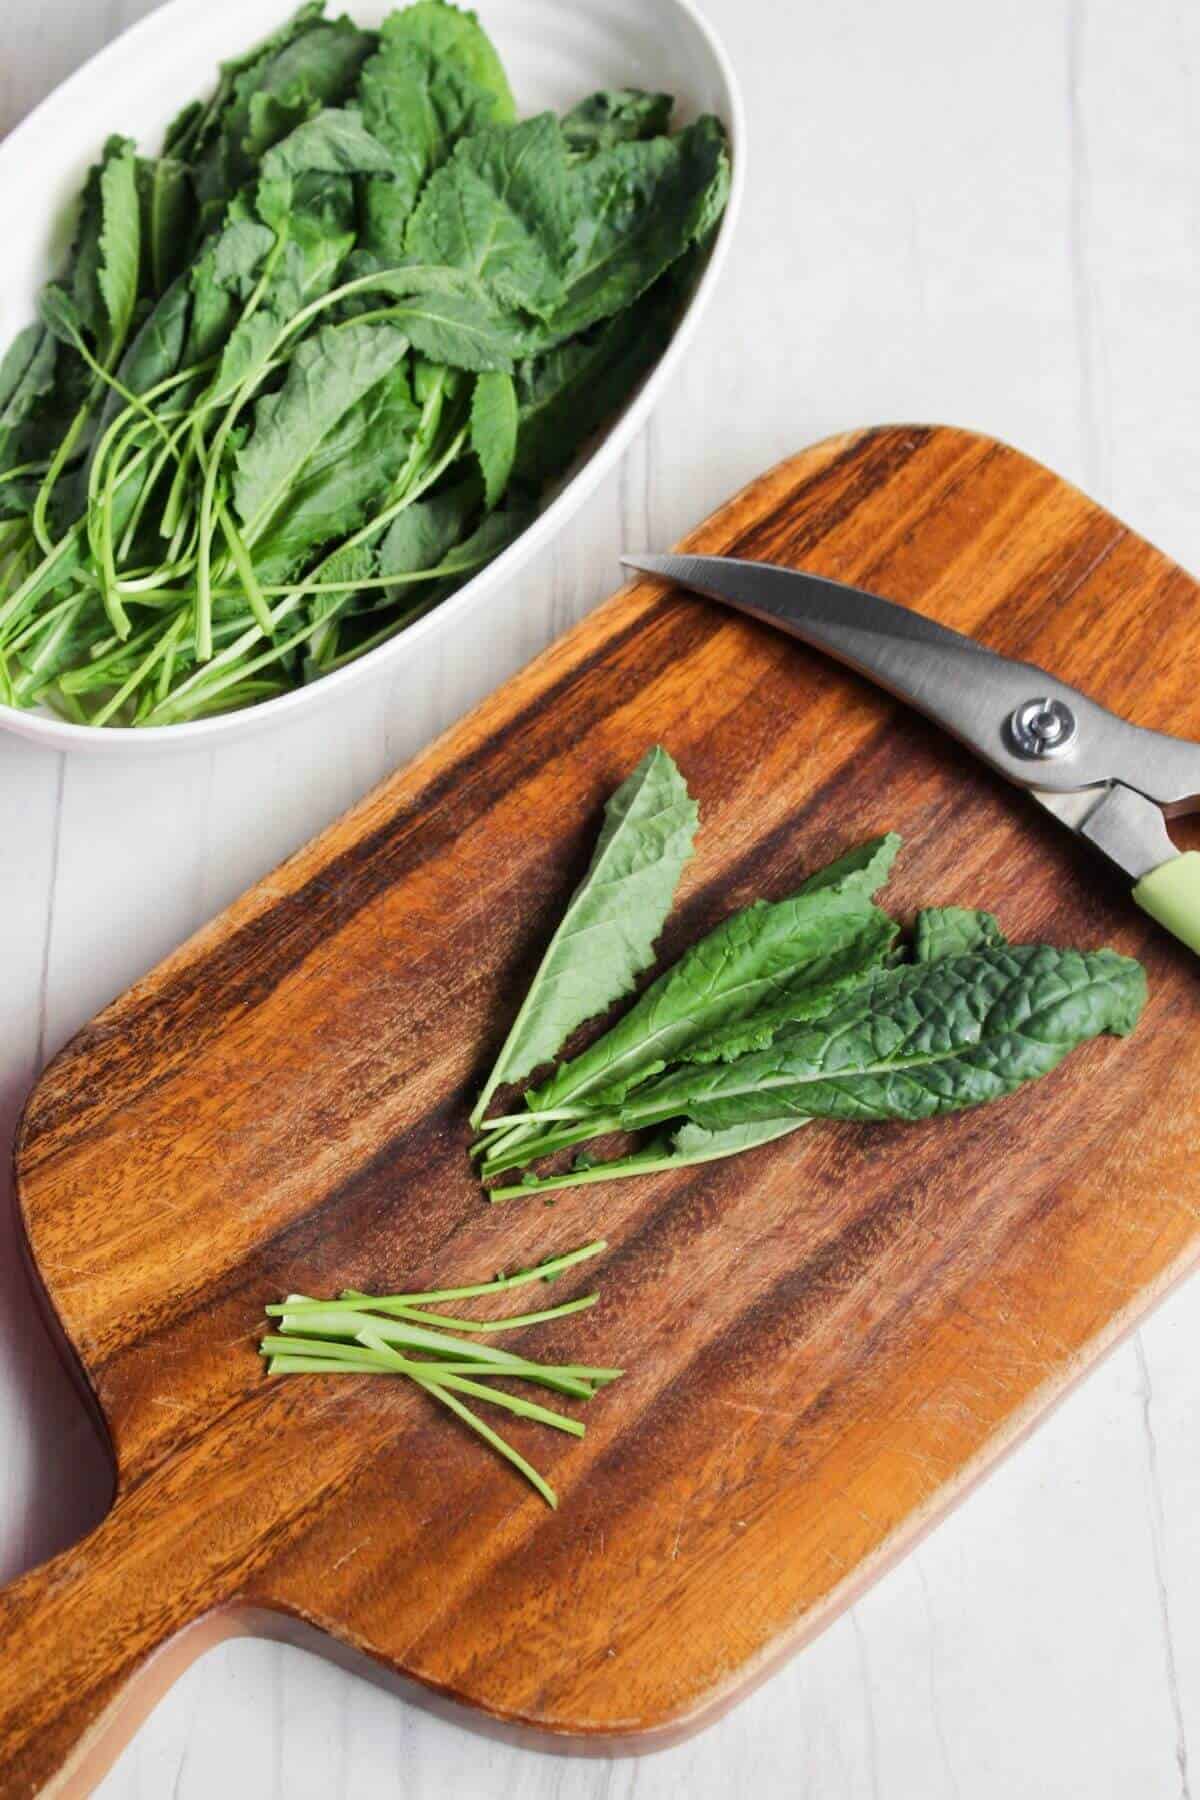 Kale leaves on a cutting board next to a pair of scissors.